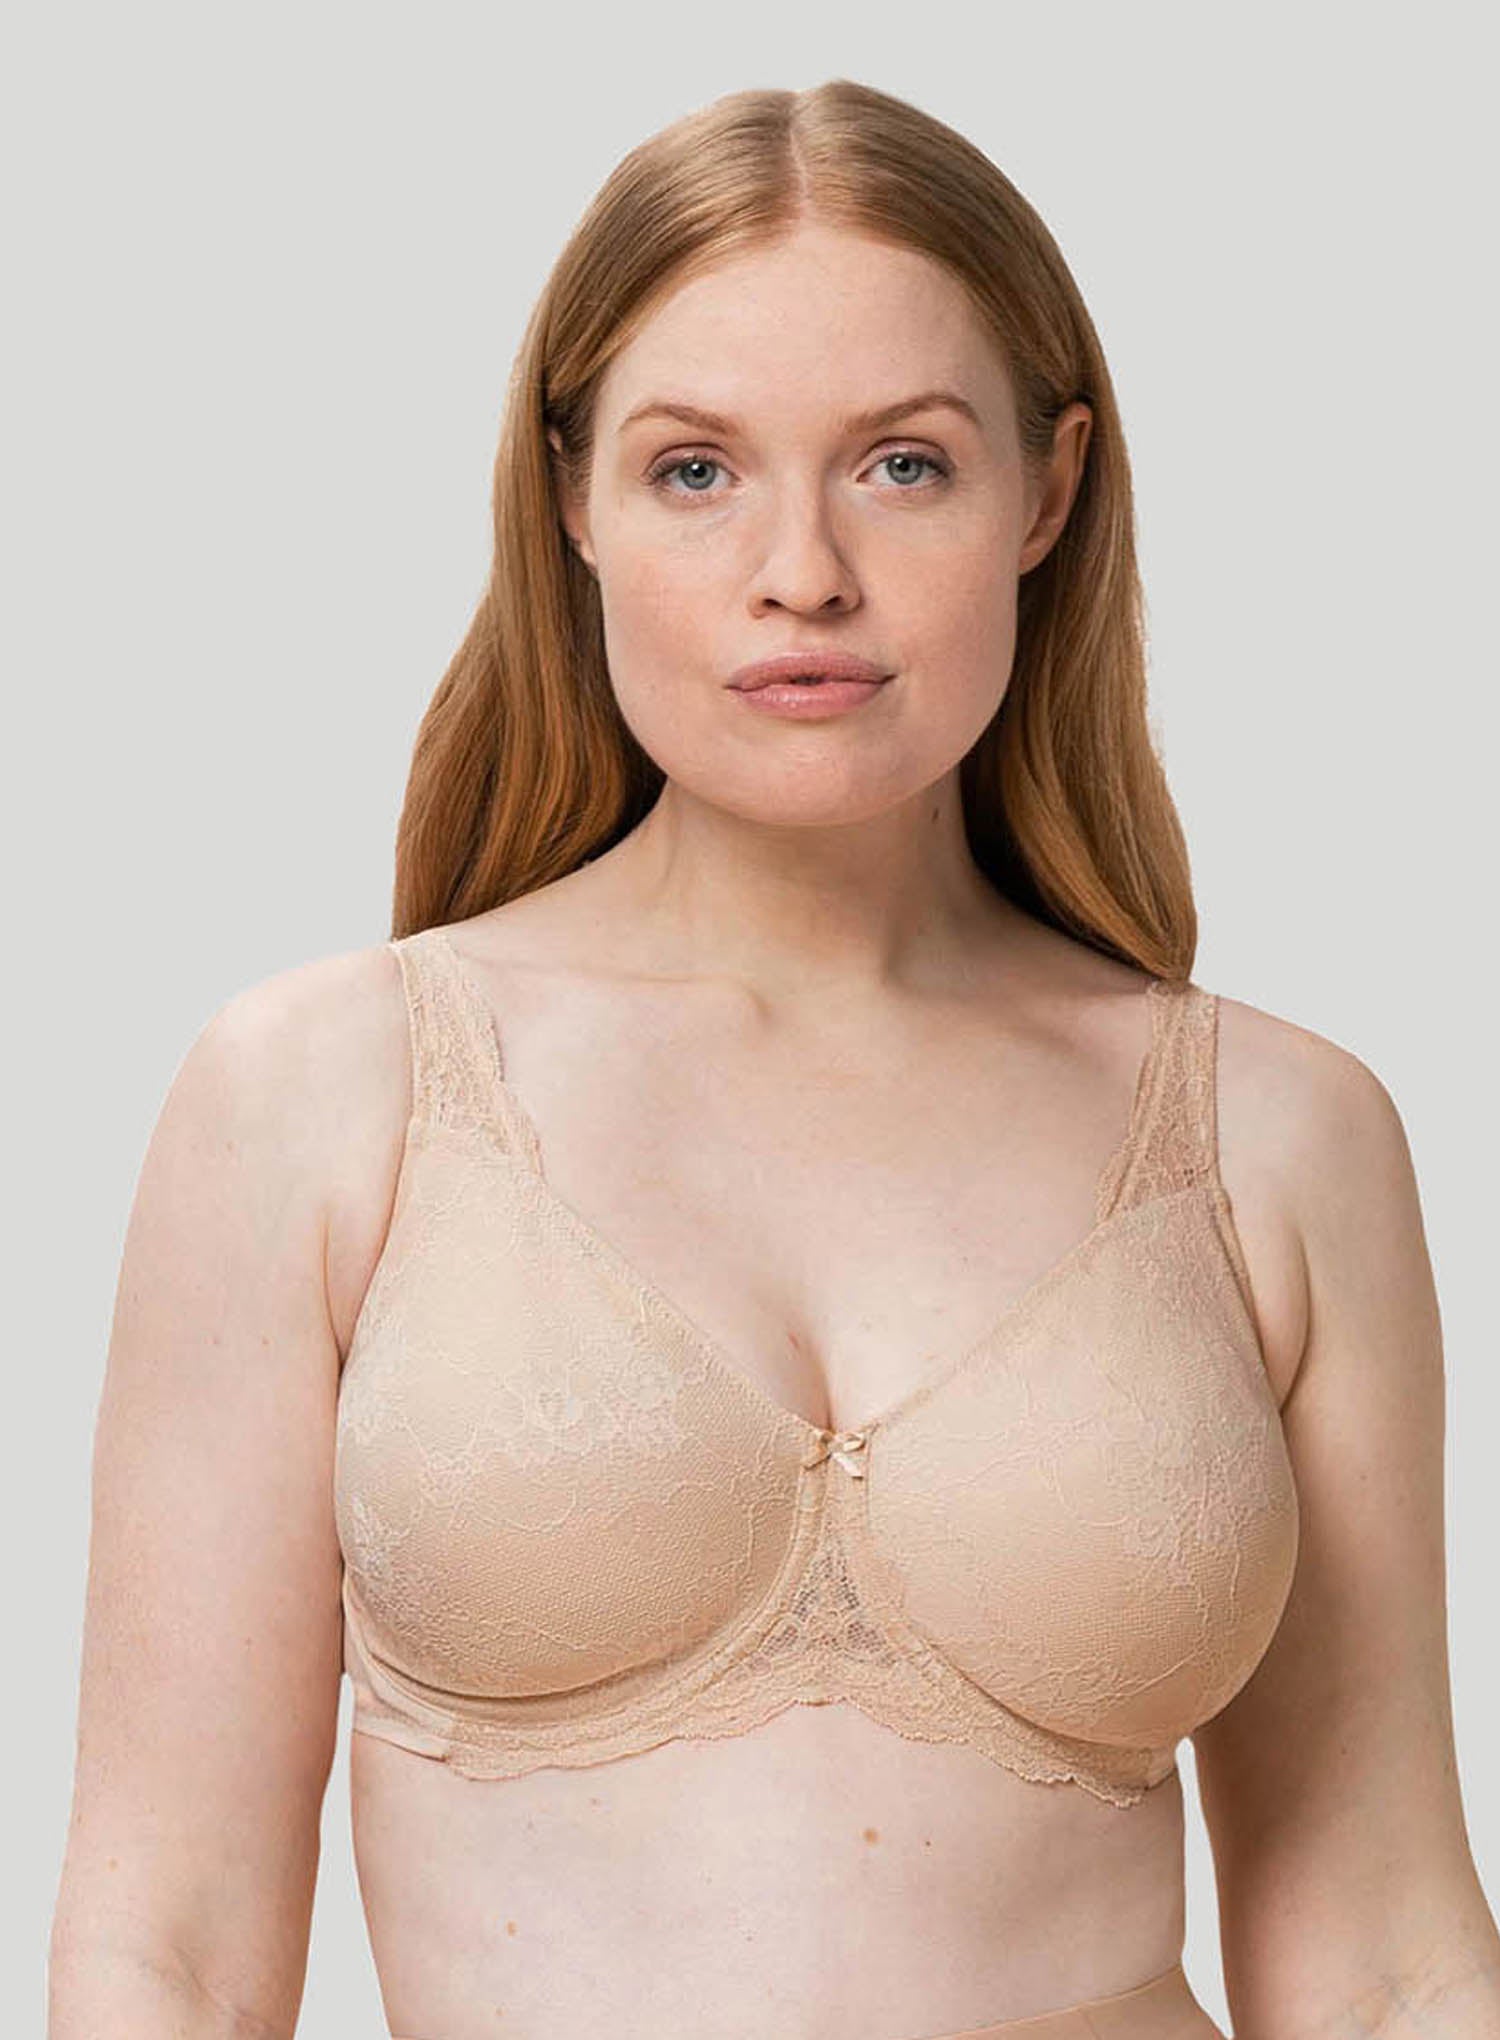 Sheer Minimiser Wired Lace Bra - Nude Pink, Sizes 10D-16F, Triumph